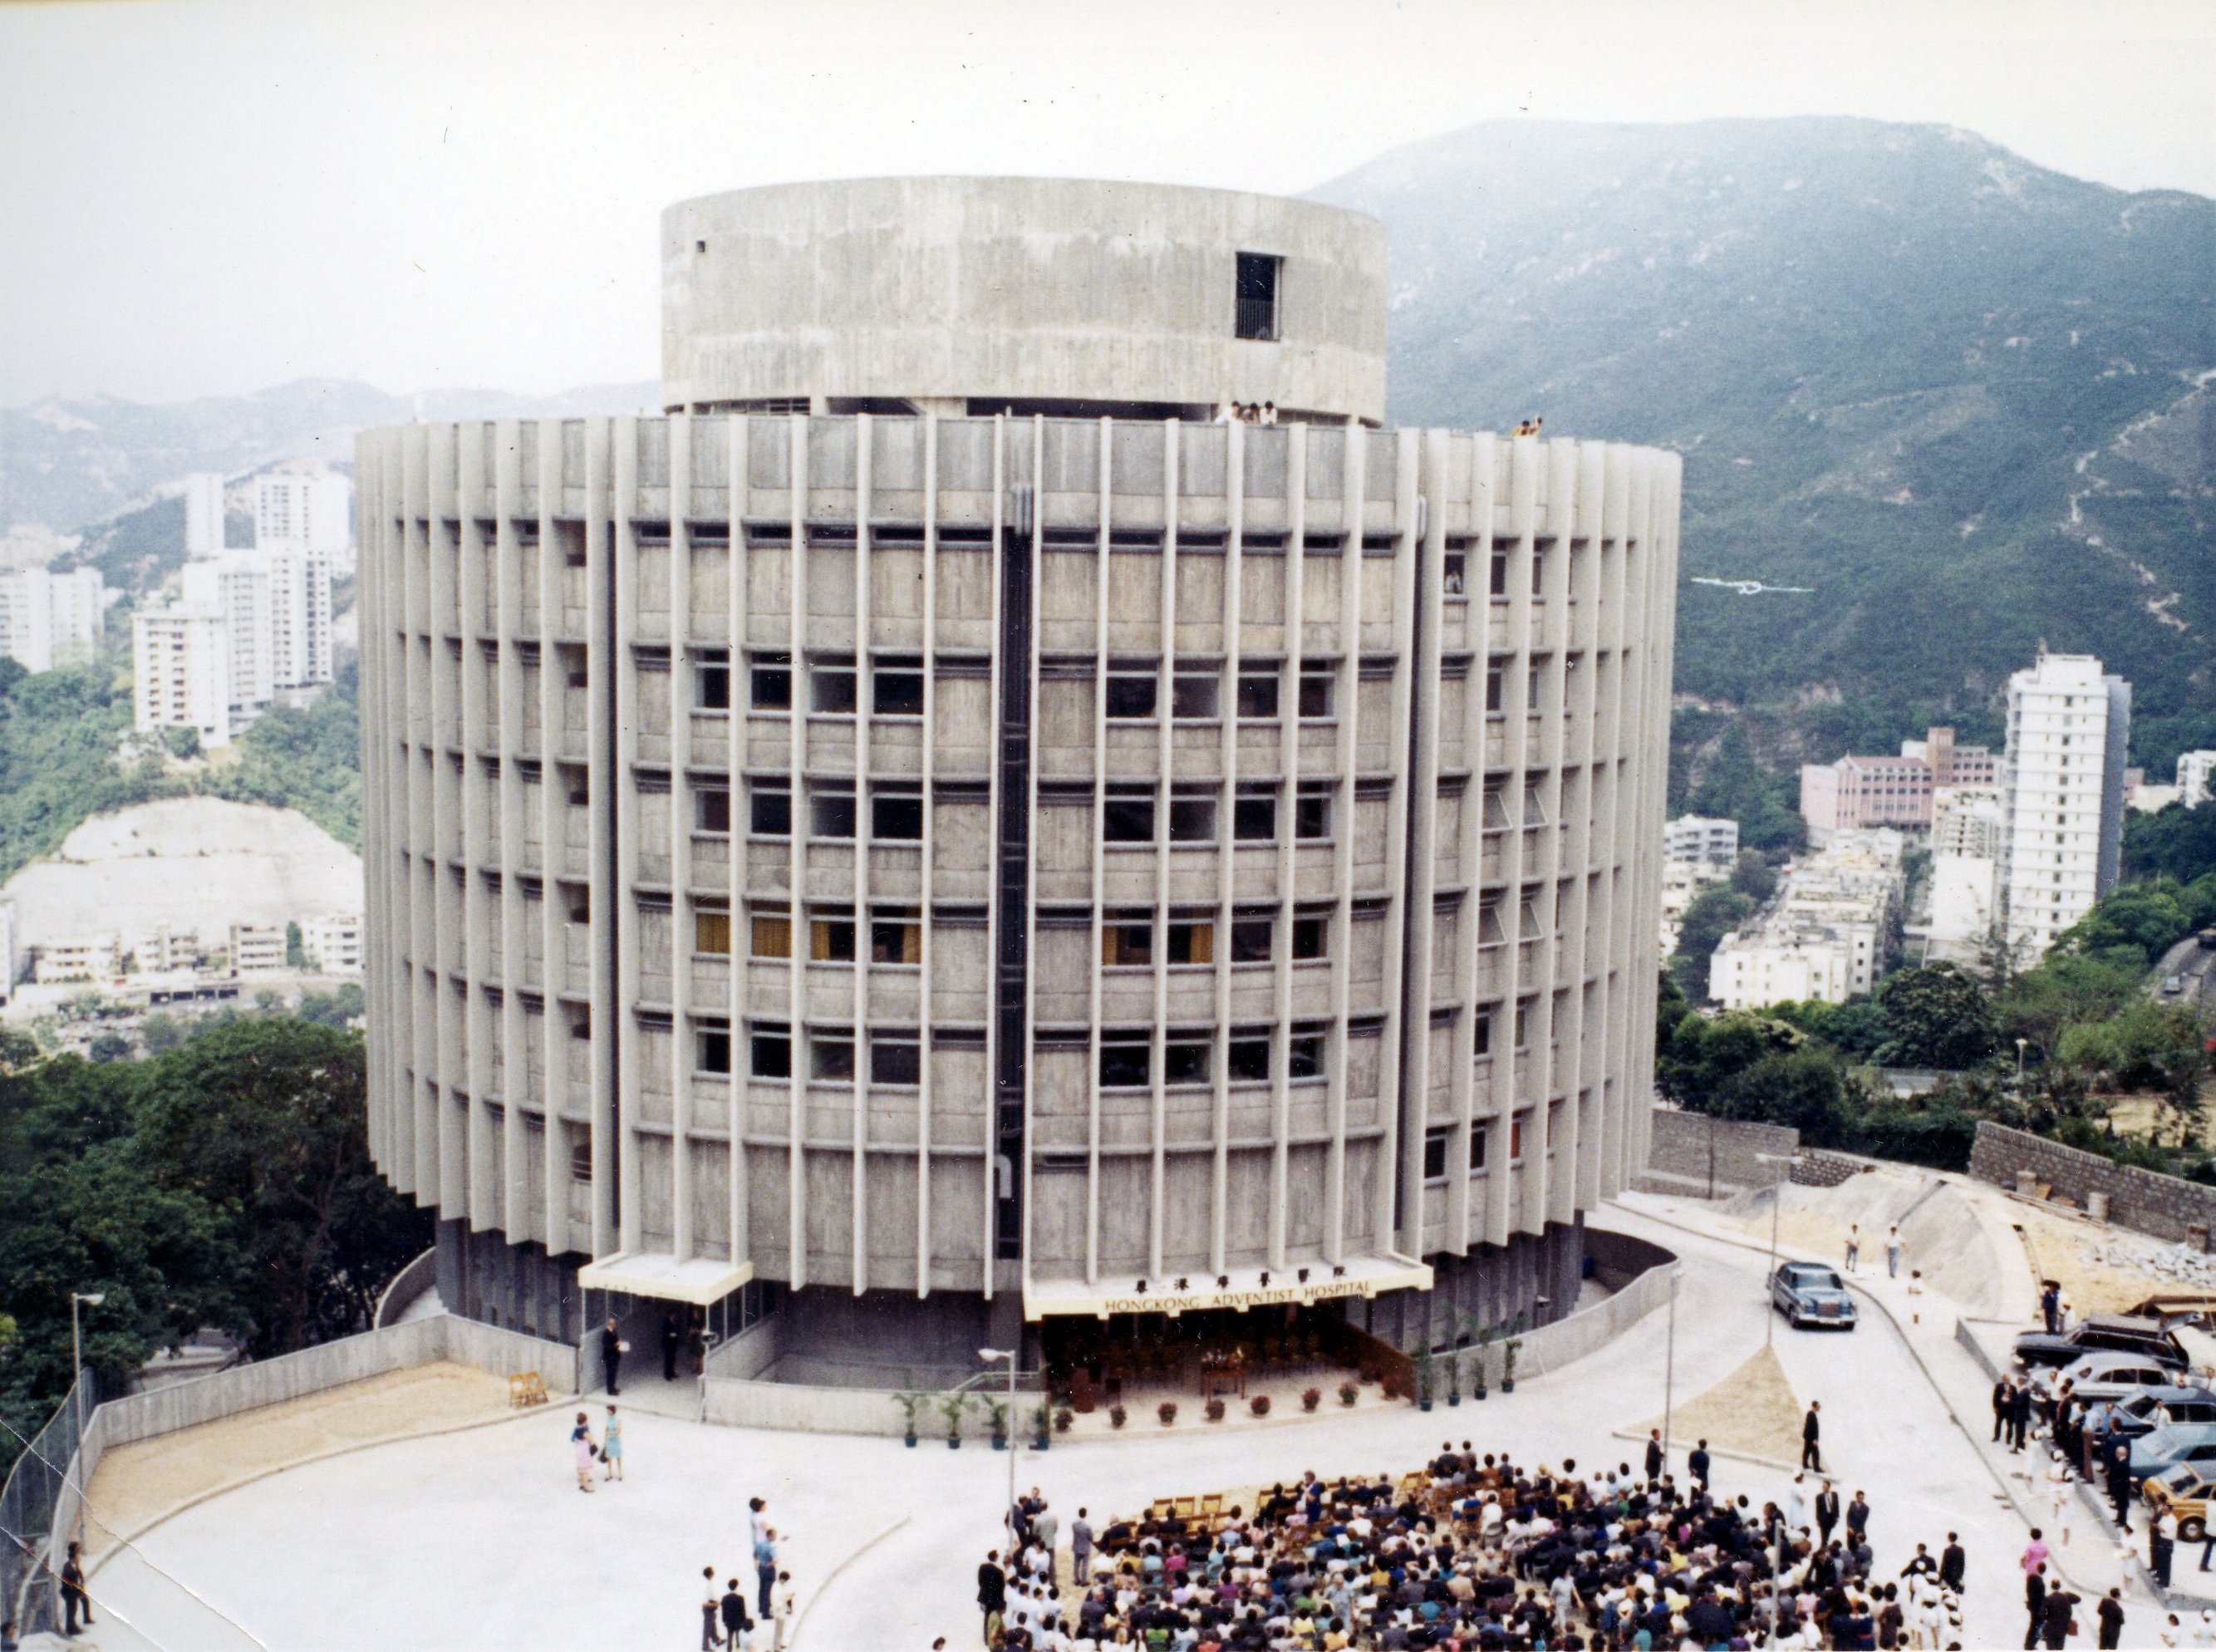 Opening ceremony of the Wong & Ouyang-designed Hong Kong Adventist Hospital, in 1971.
